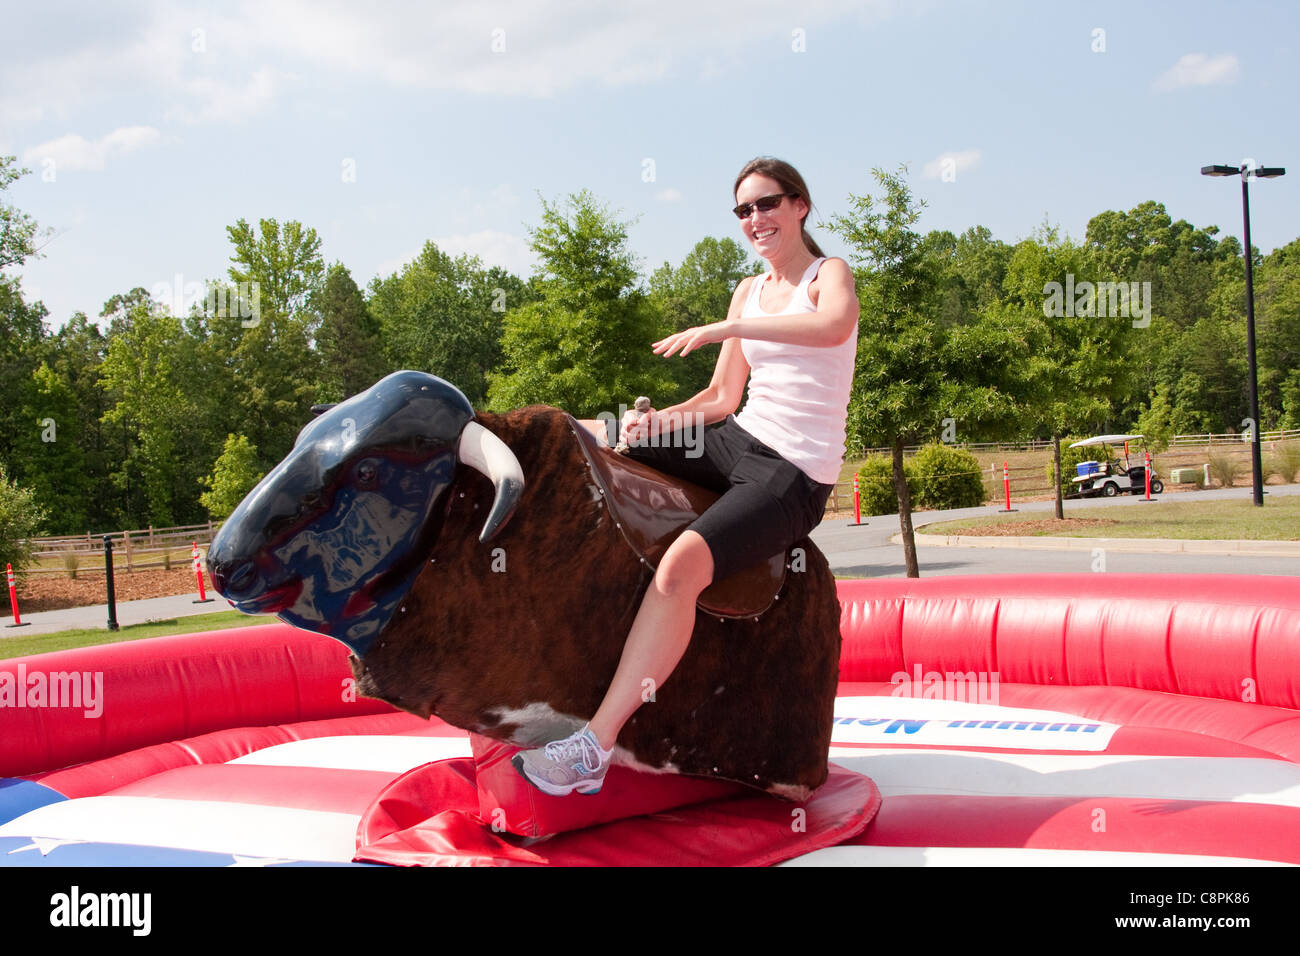 Woman riding a mechanical bull at a festival Stock Photo